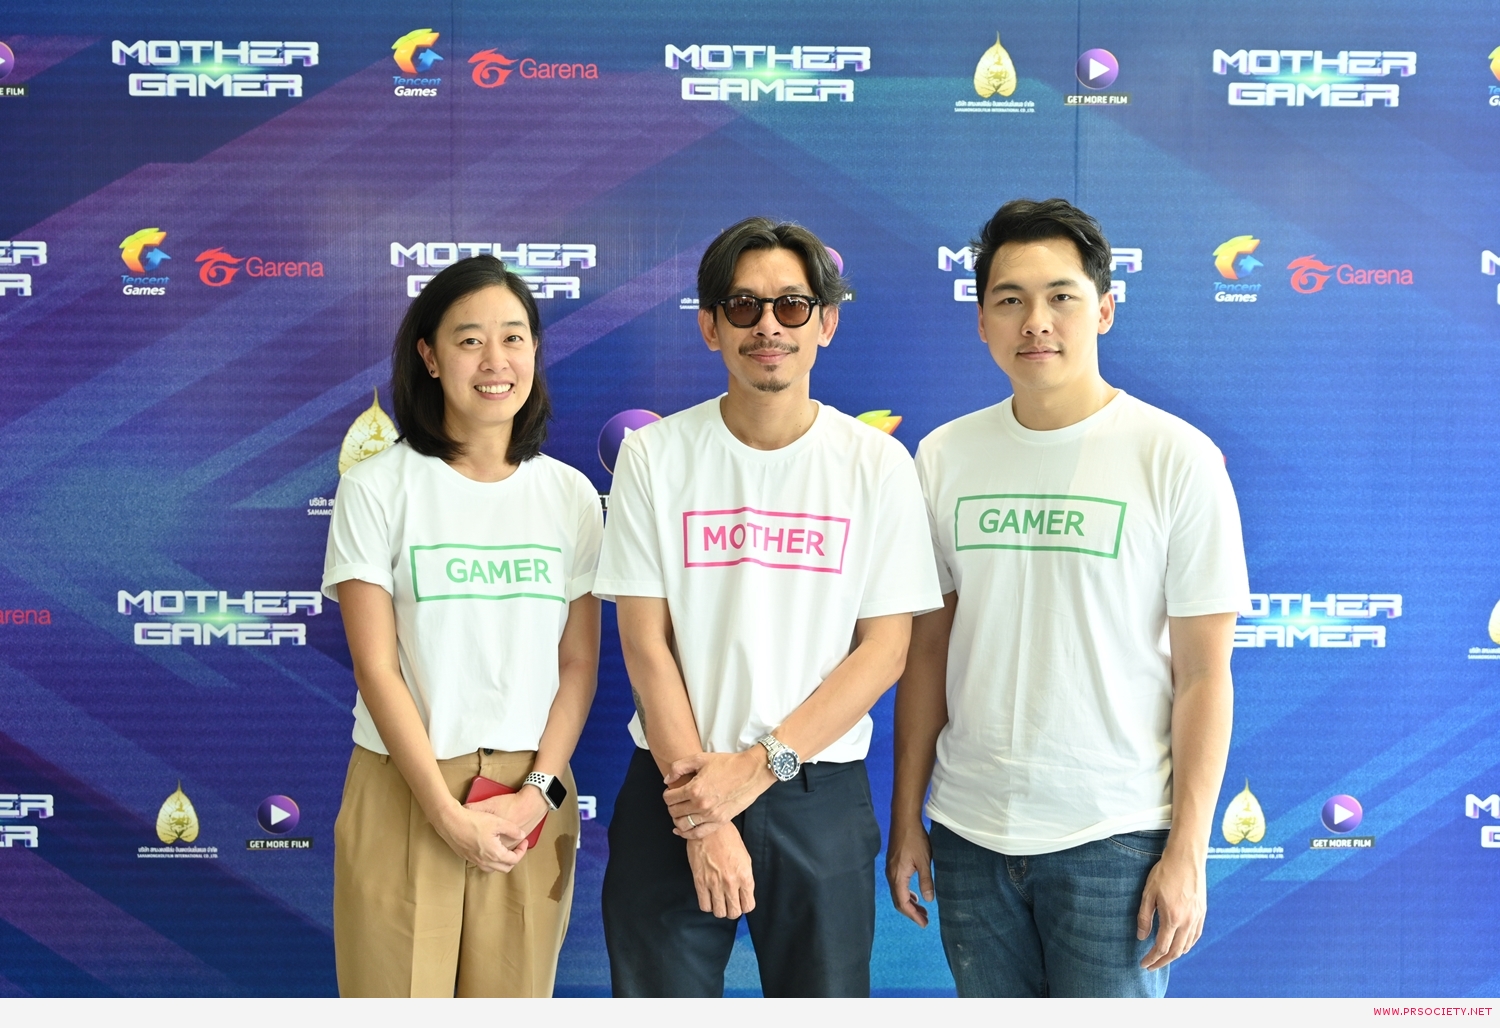 Mother Gamer_Action eSports with Garena (5)